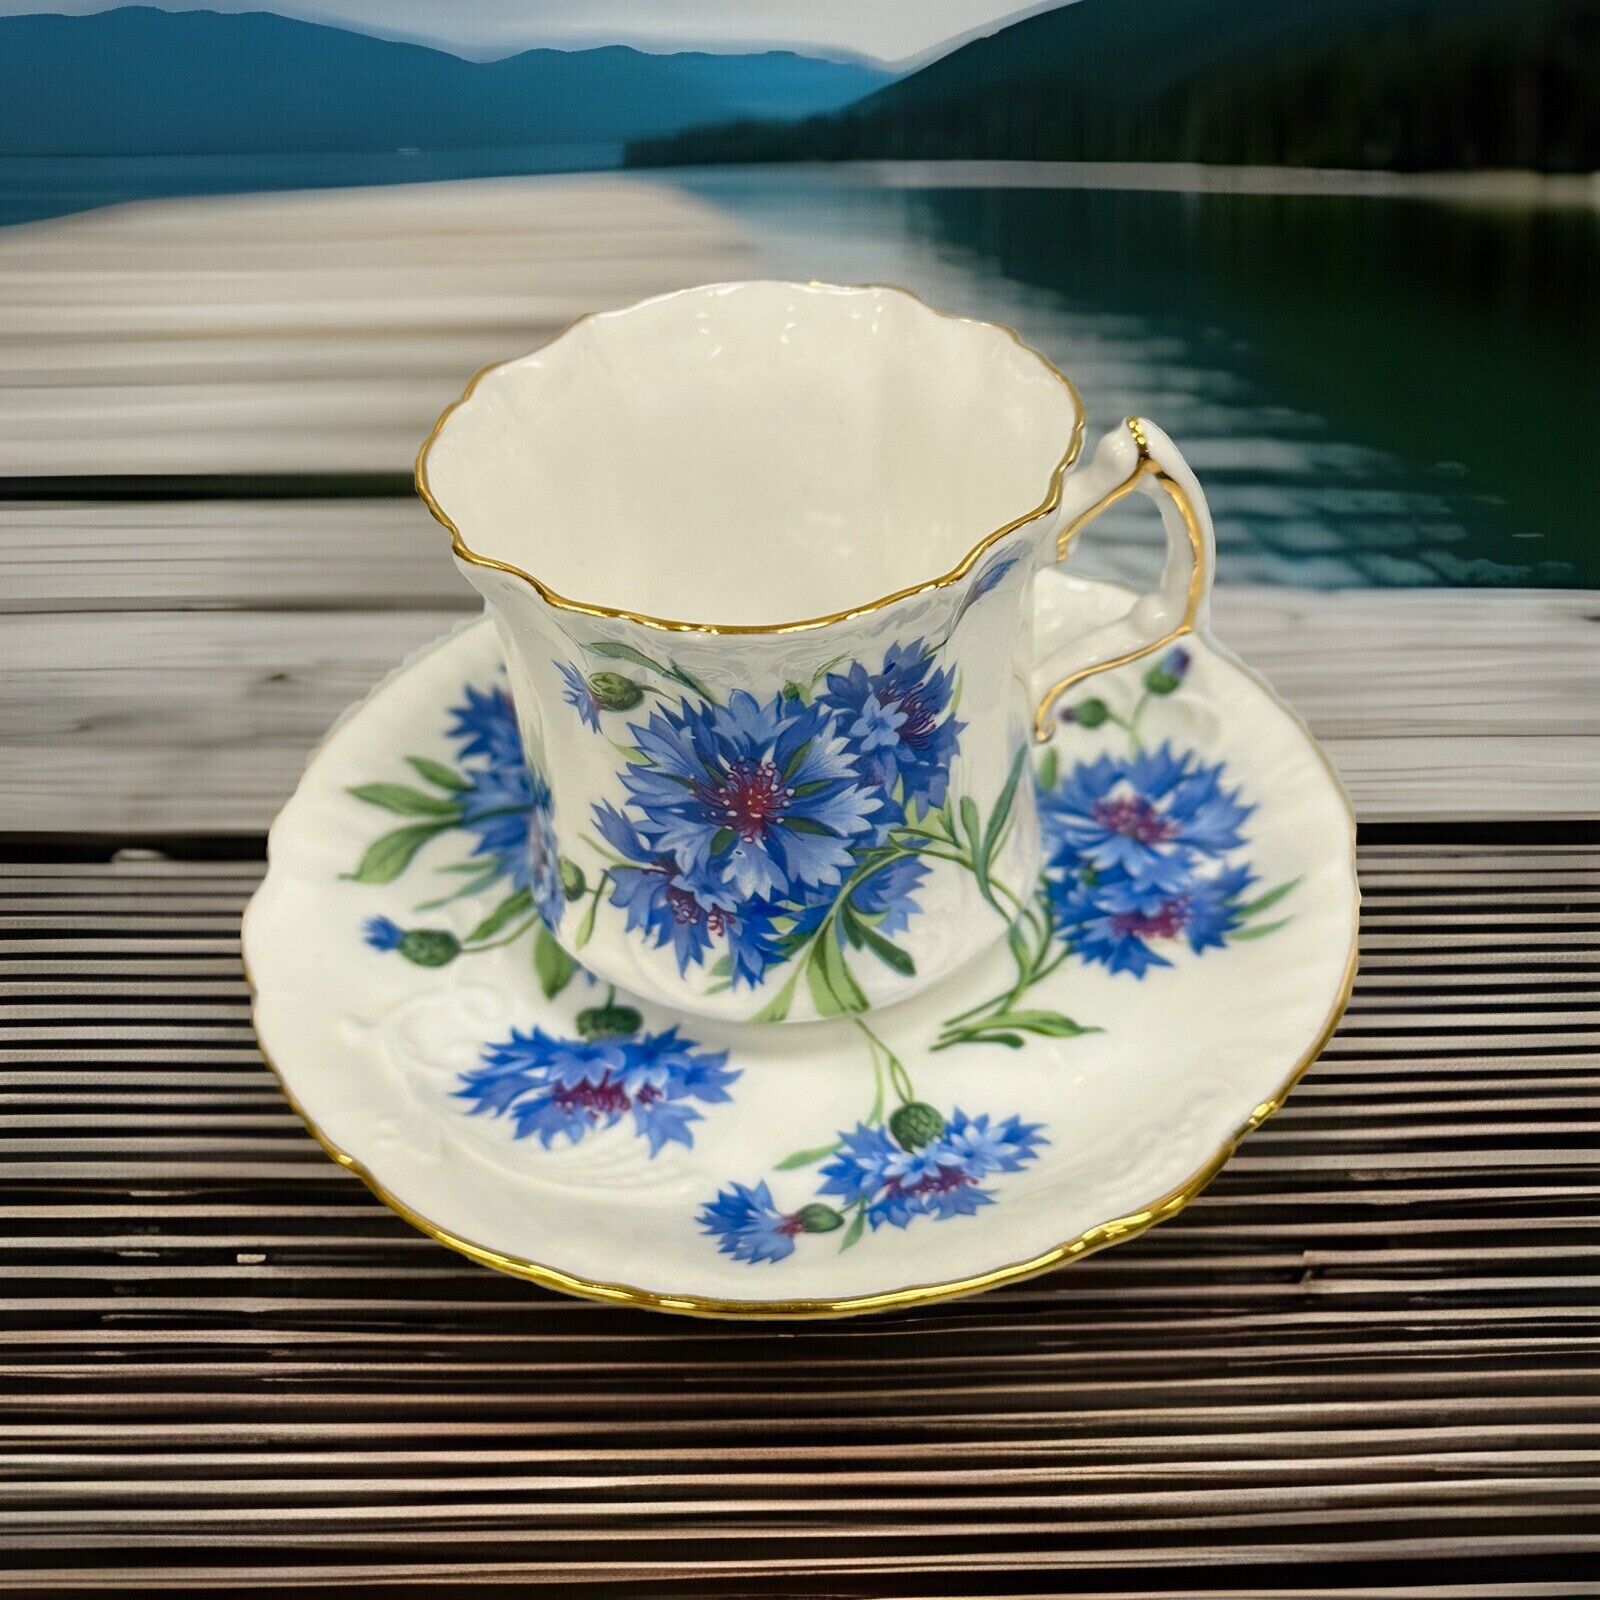 Vintage Hammersley & Co. Teacup & Saucer Blue Floral Bone China Made In England